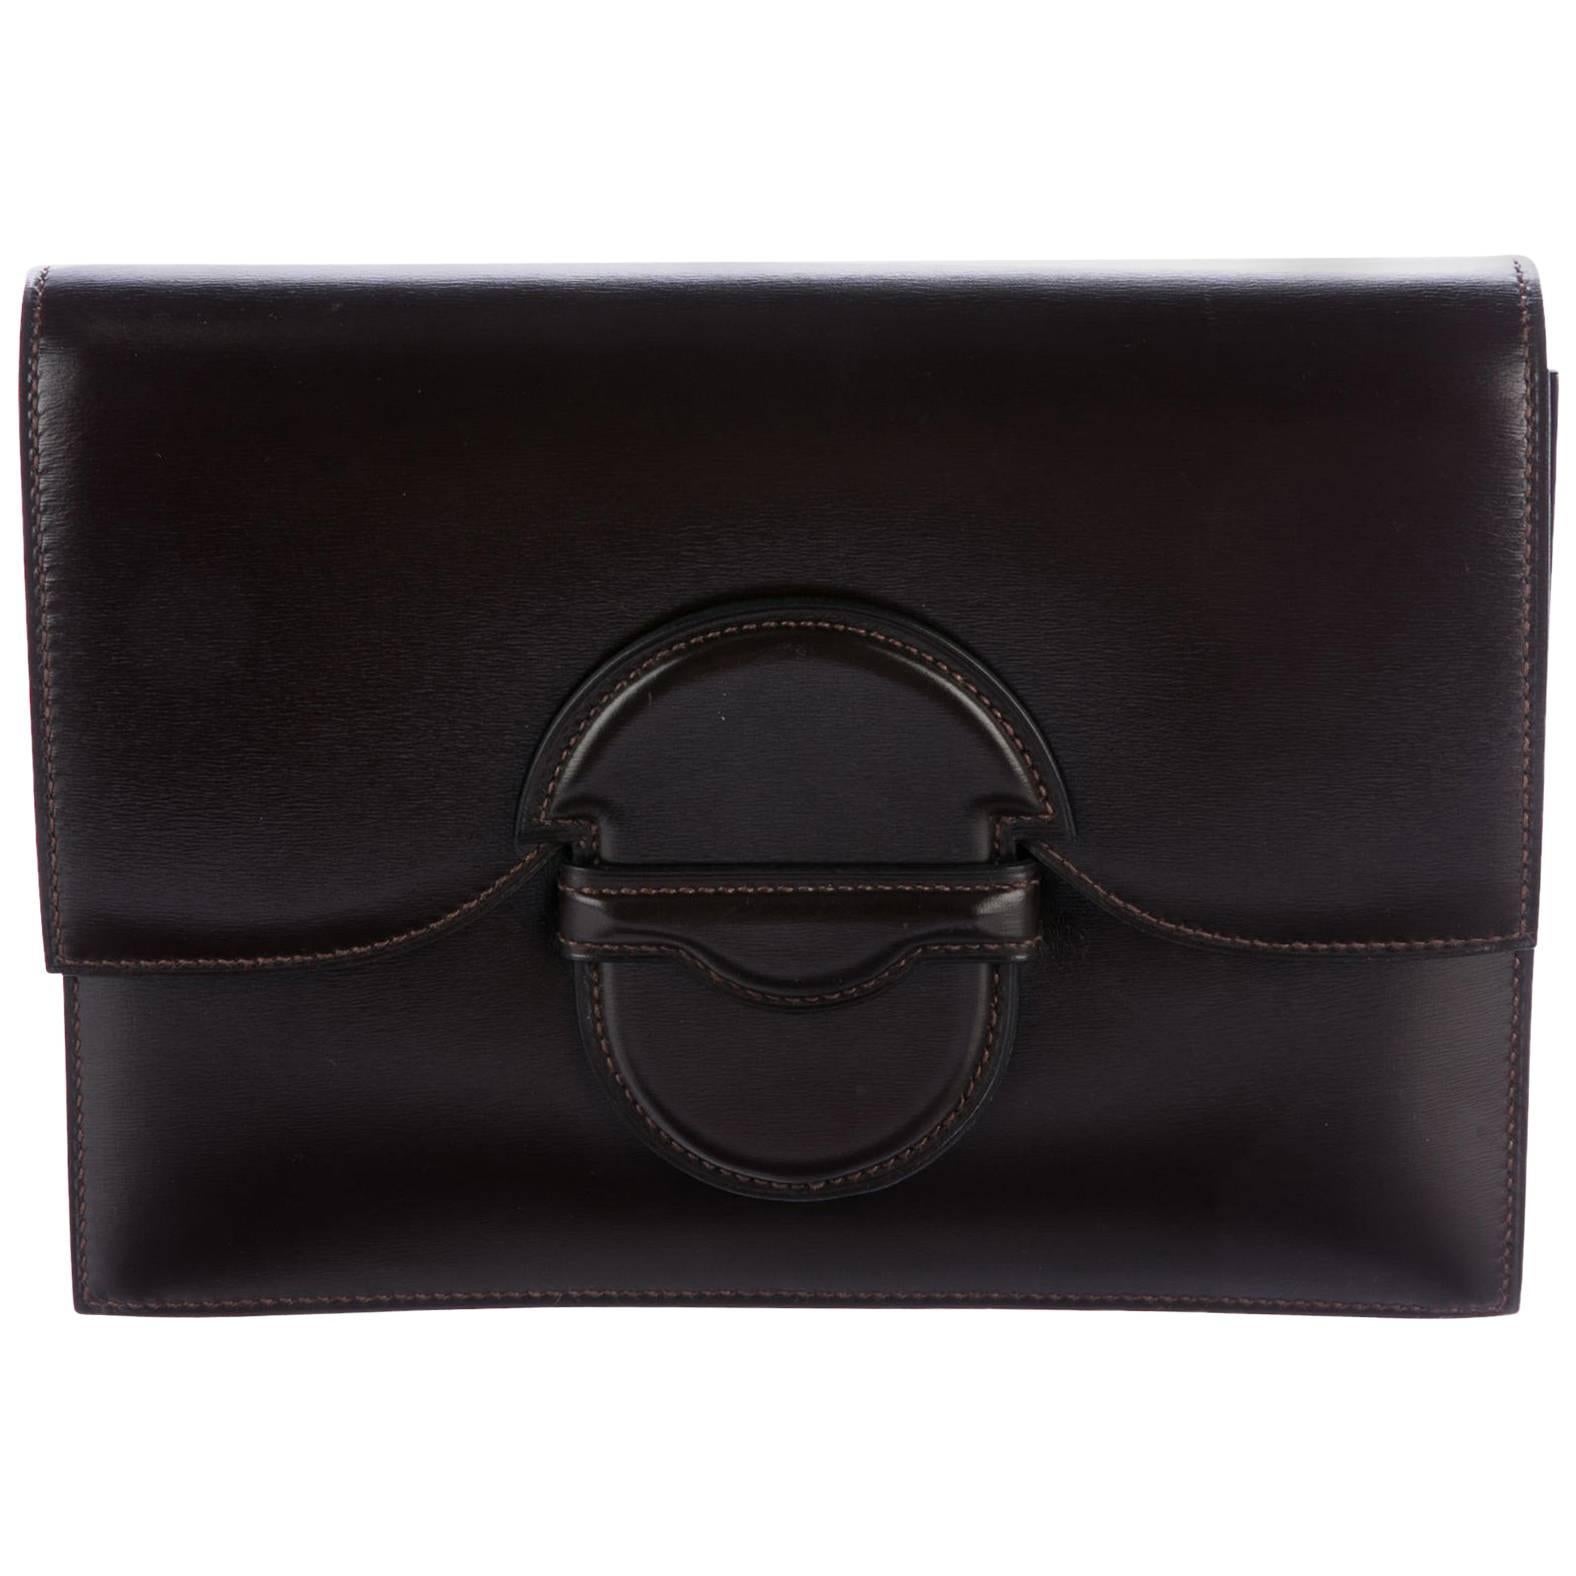 Hermes Leather Small Envelope Evening Clutch Flap Hand Bag